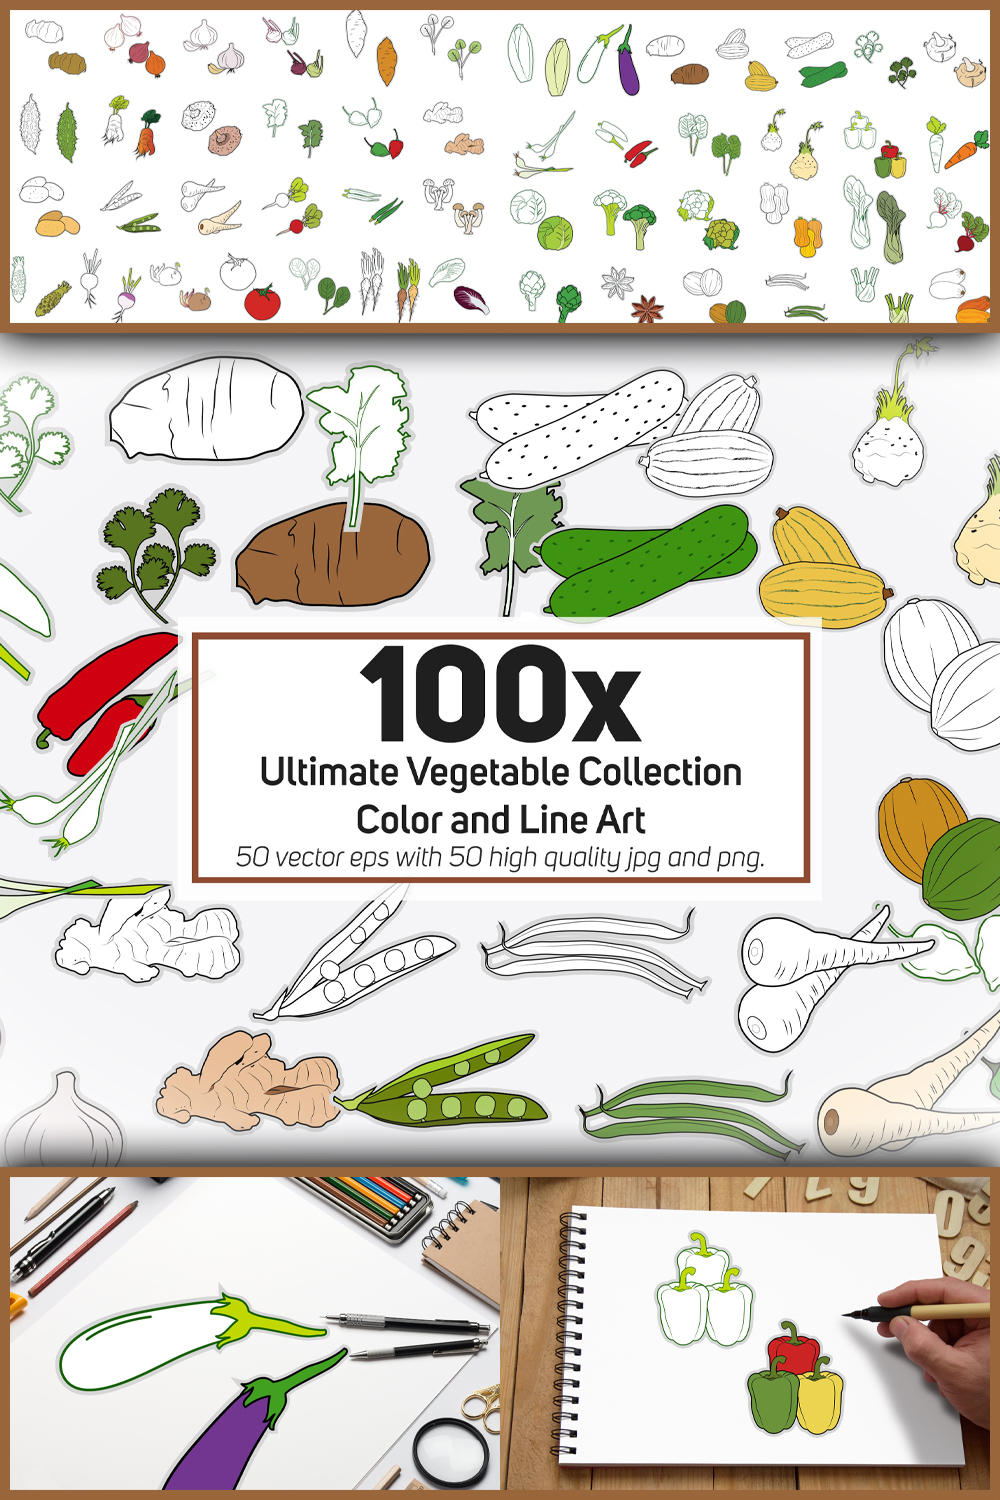 545392 100x ultimate vegetable collection color and line pinterest 1000 1500 518